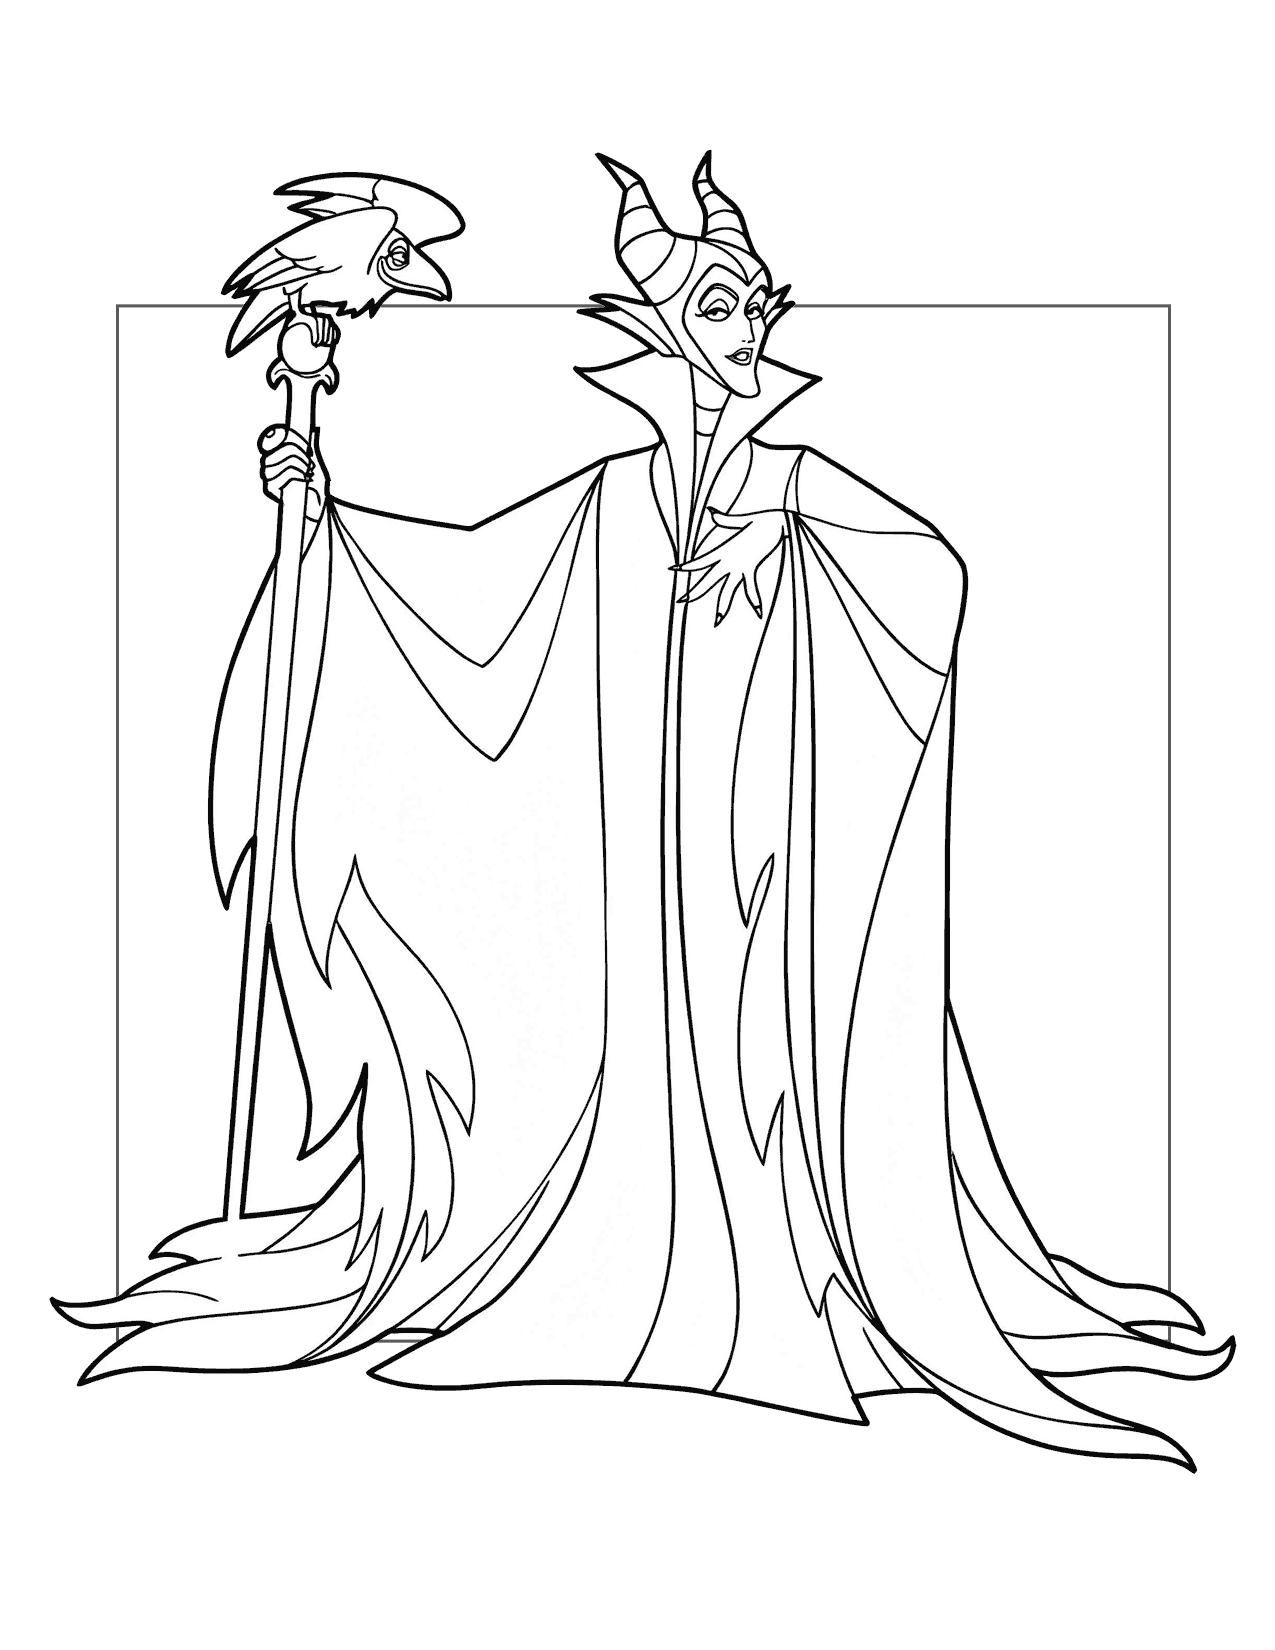 Old School Maleficent Coloring Page